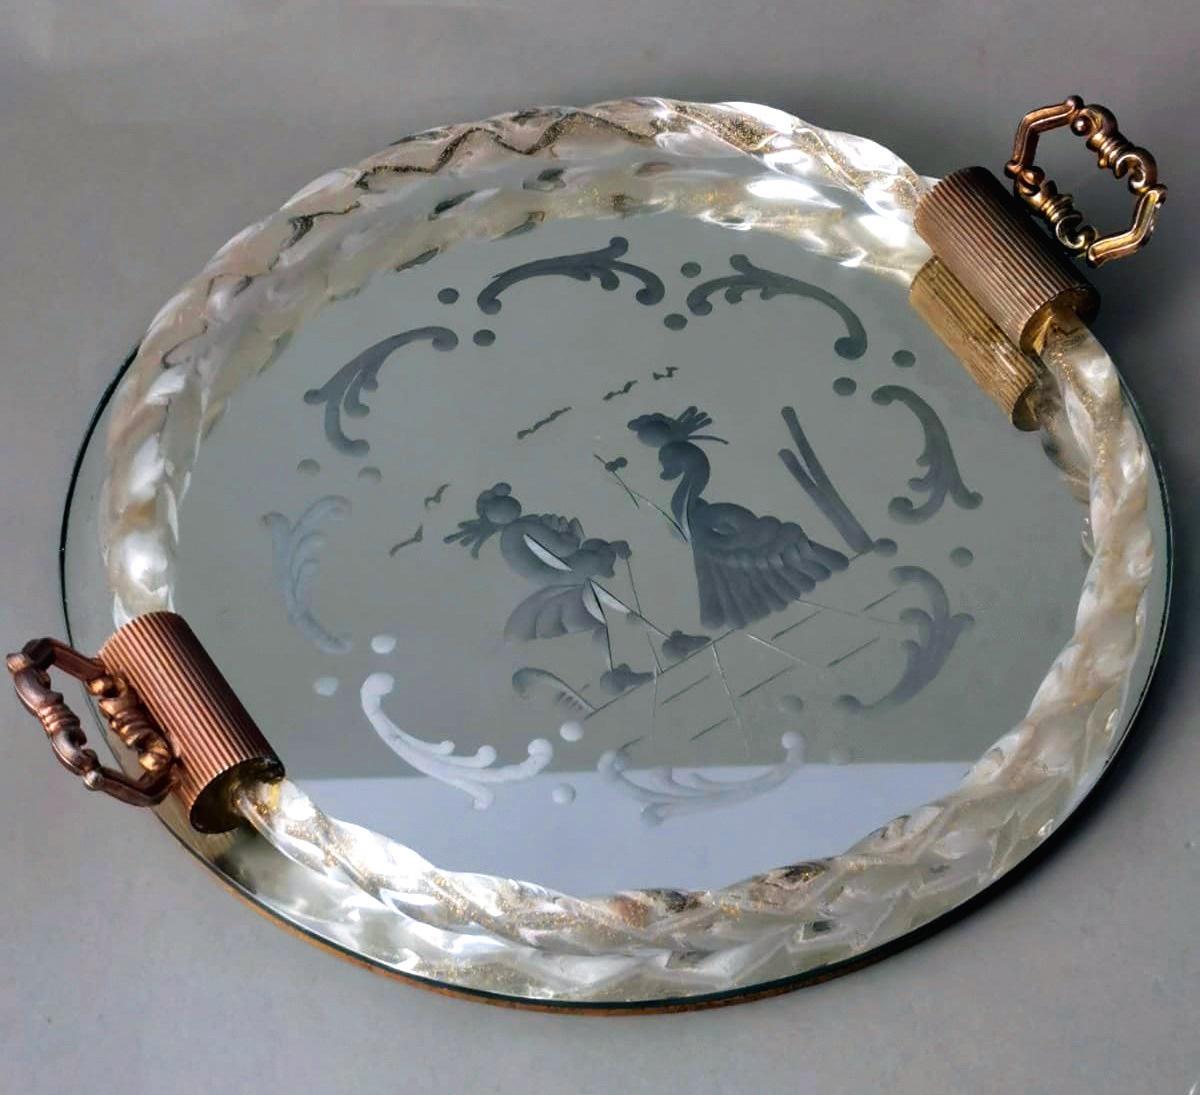 We kindly suggest that you read the entire description, as with it we try to give you detailed technical and historical information to guarantee the authenticity of our objects.
Iconic vanity tray with handles; the round top is a mirror and has